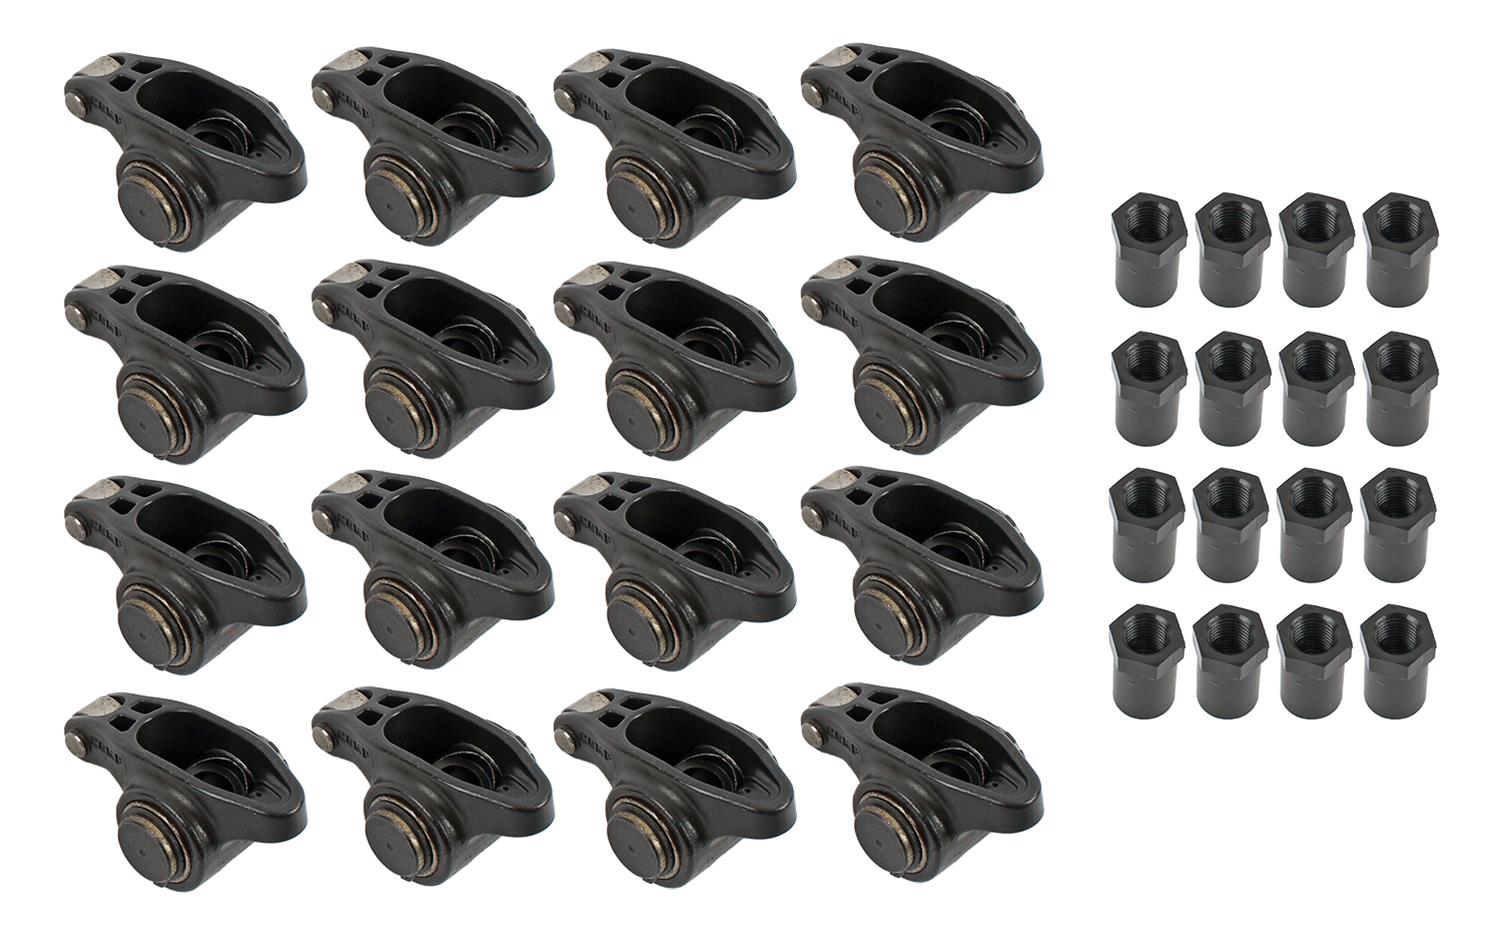 COMP Cams 1605-1 Ultra Pro Magnum Roller Rocker Arm with 1.6 Ratio and 7/16 Stud Diameter for Small Block Chevrolet